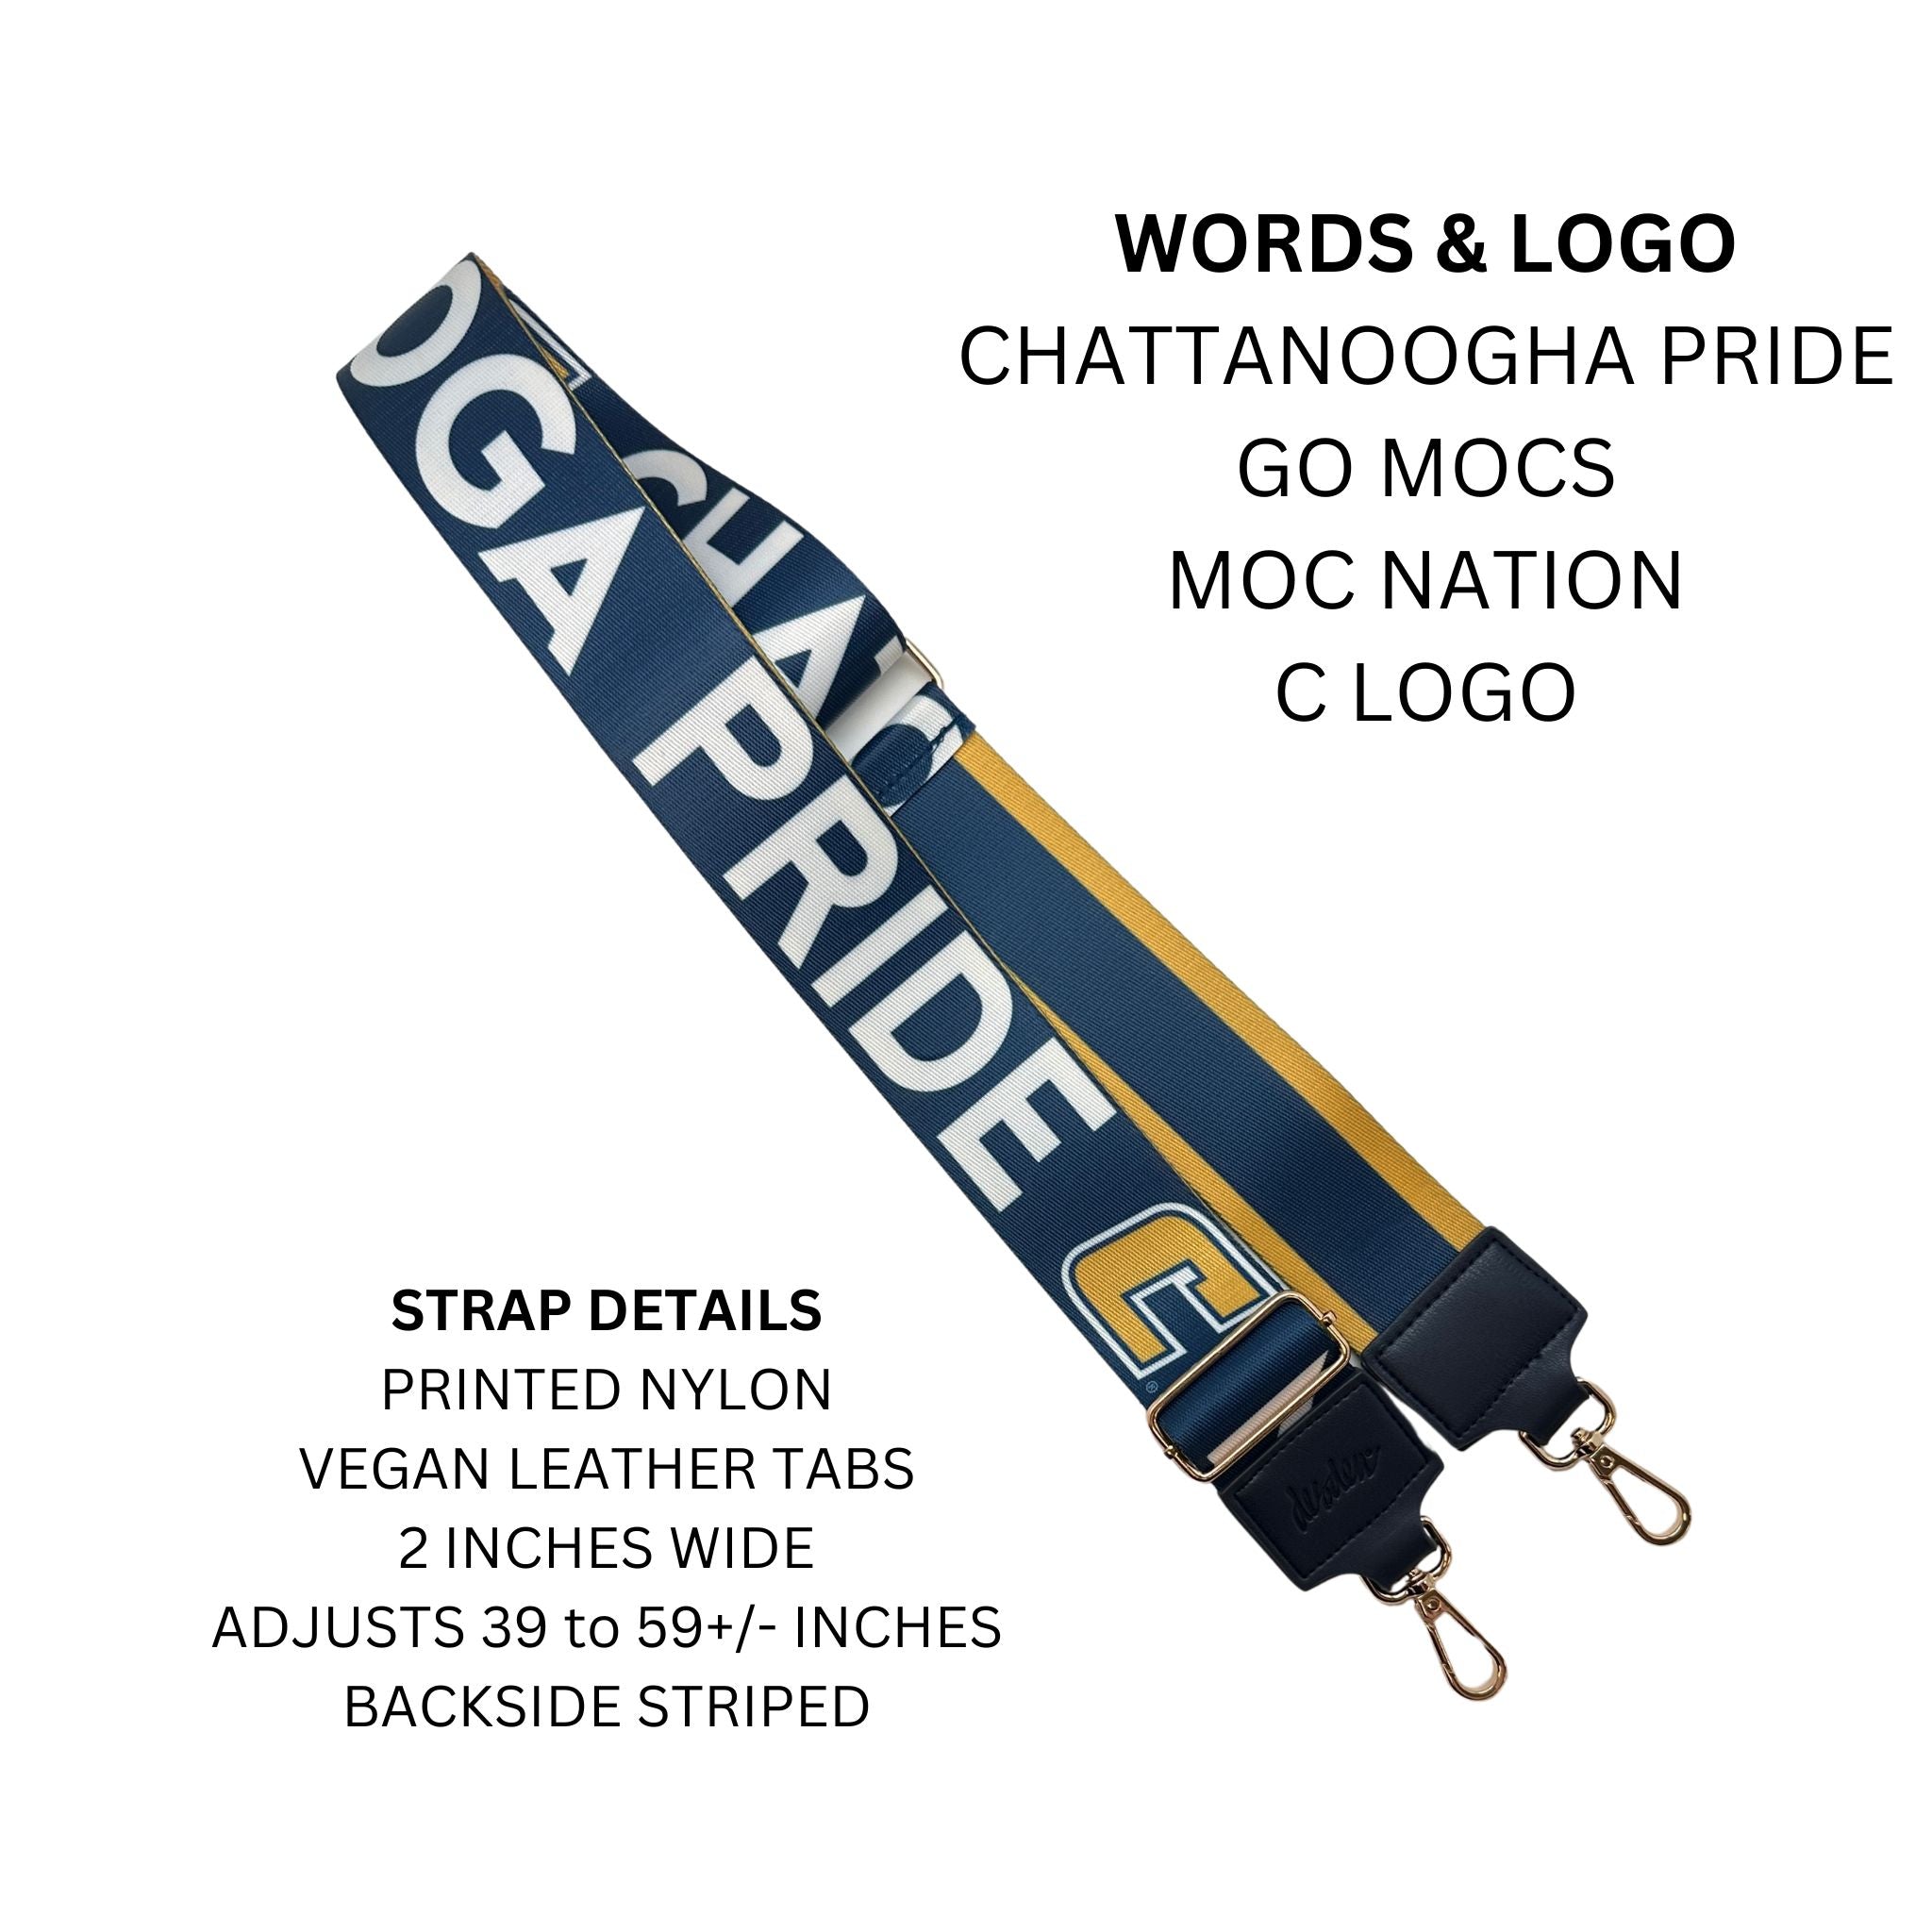 TENNESSEE CHATTANOOGA 2" - Officially Licensed - Stripe